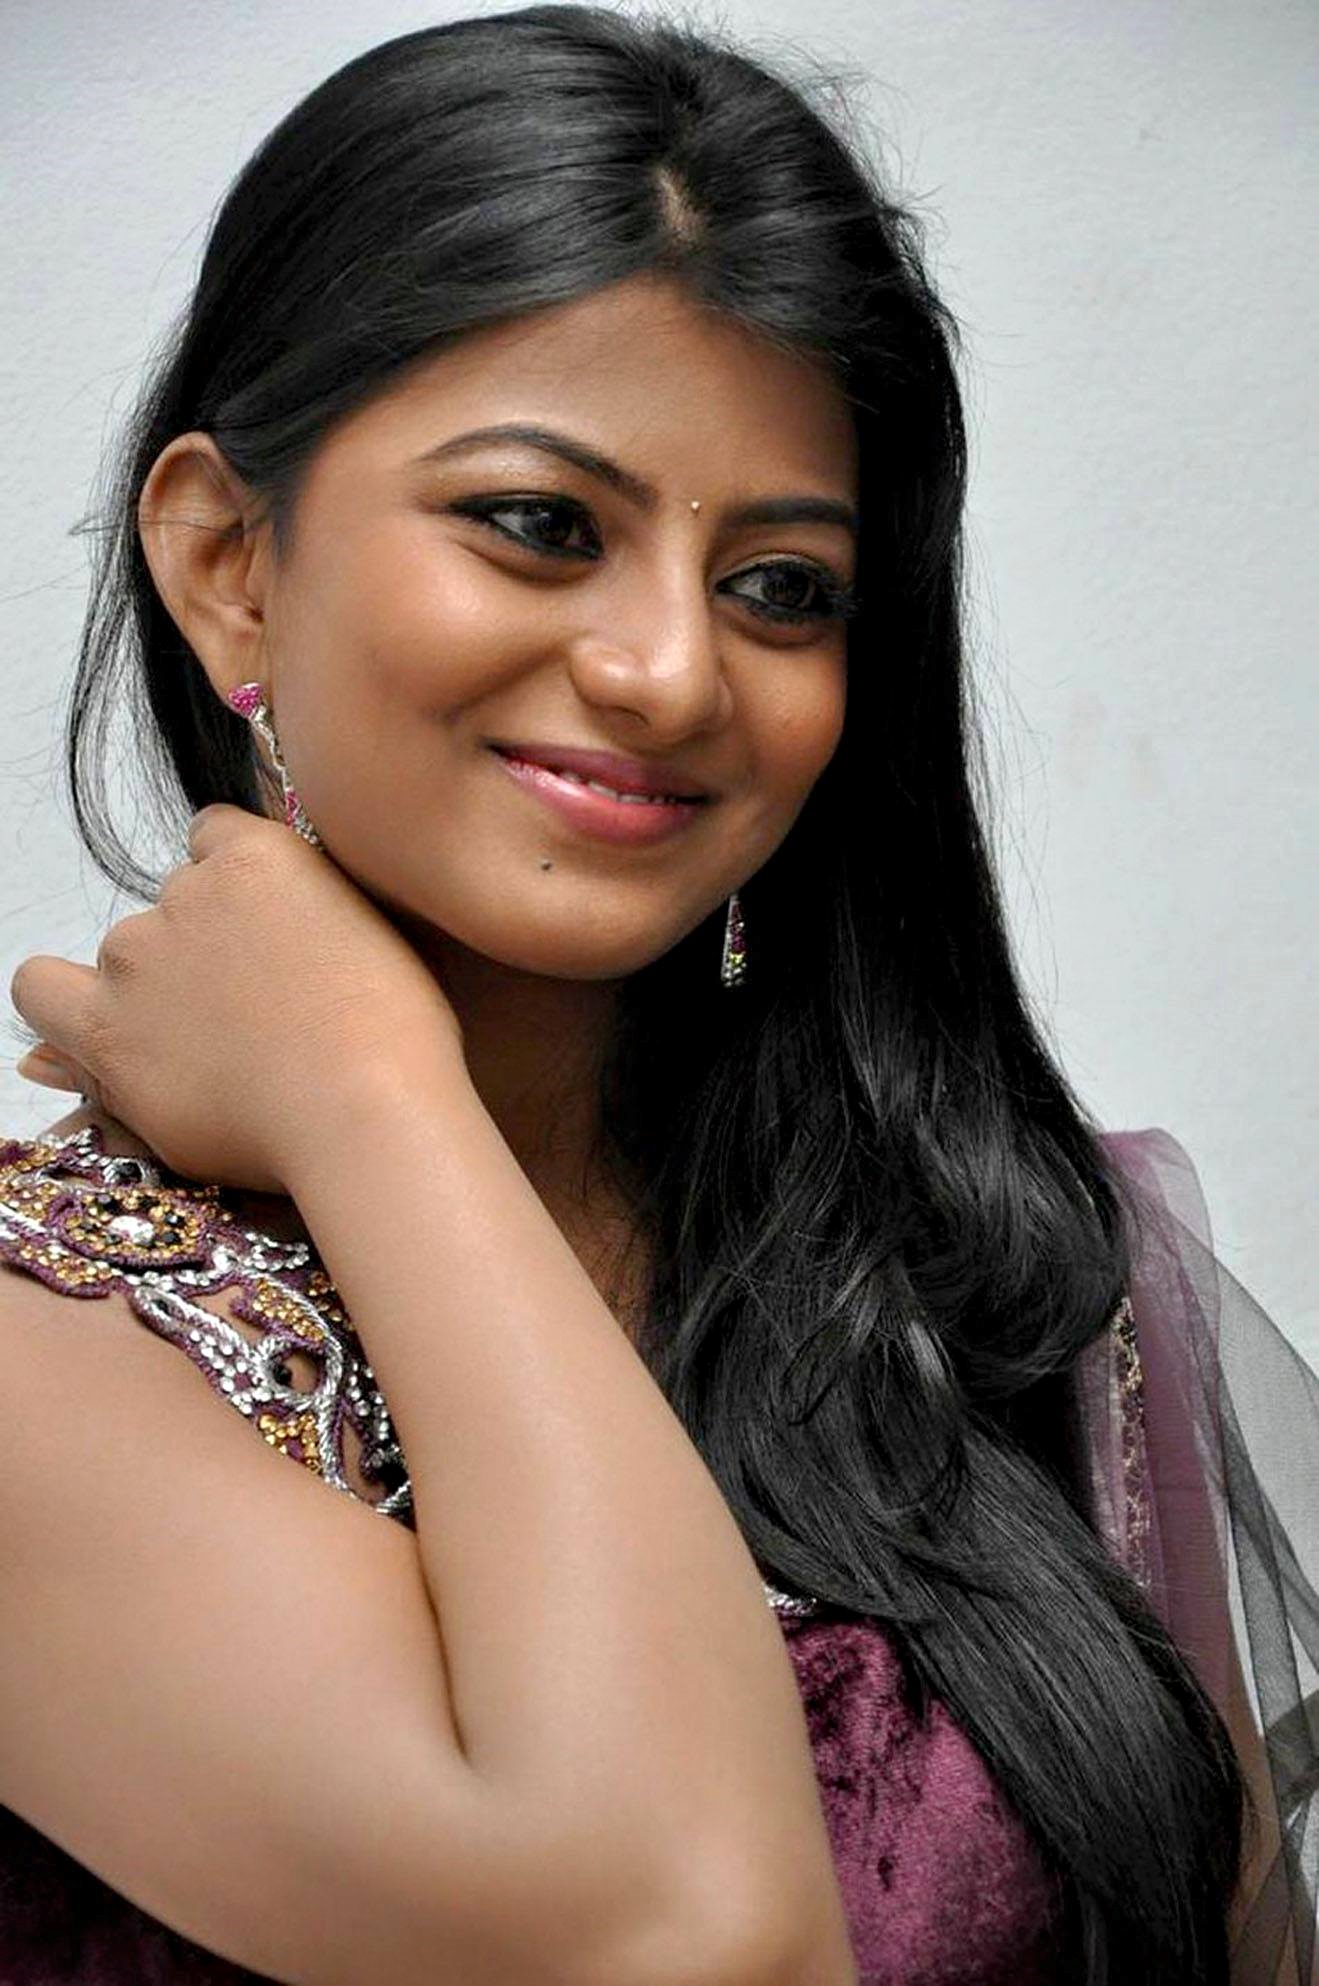 Cute And Lovely Images Of Tamil Film Actress Ineya - Cinejolly